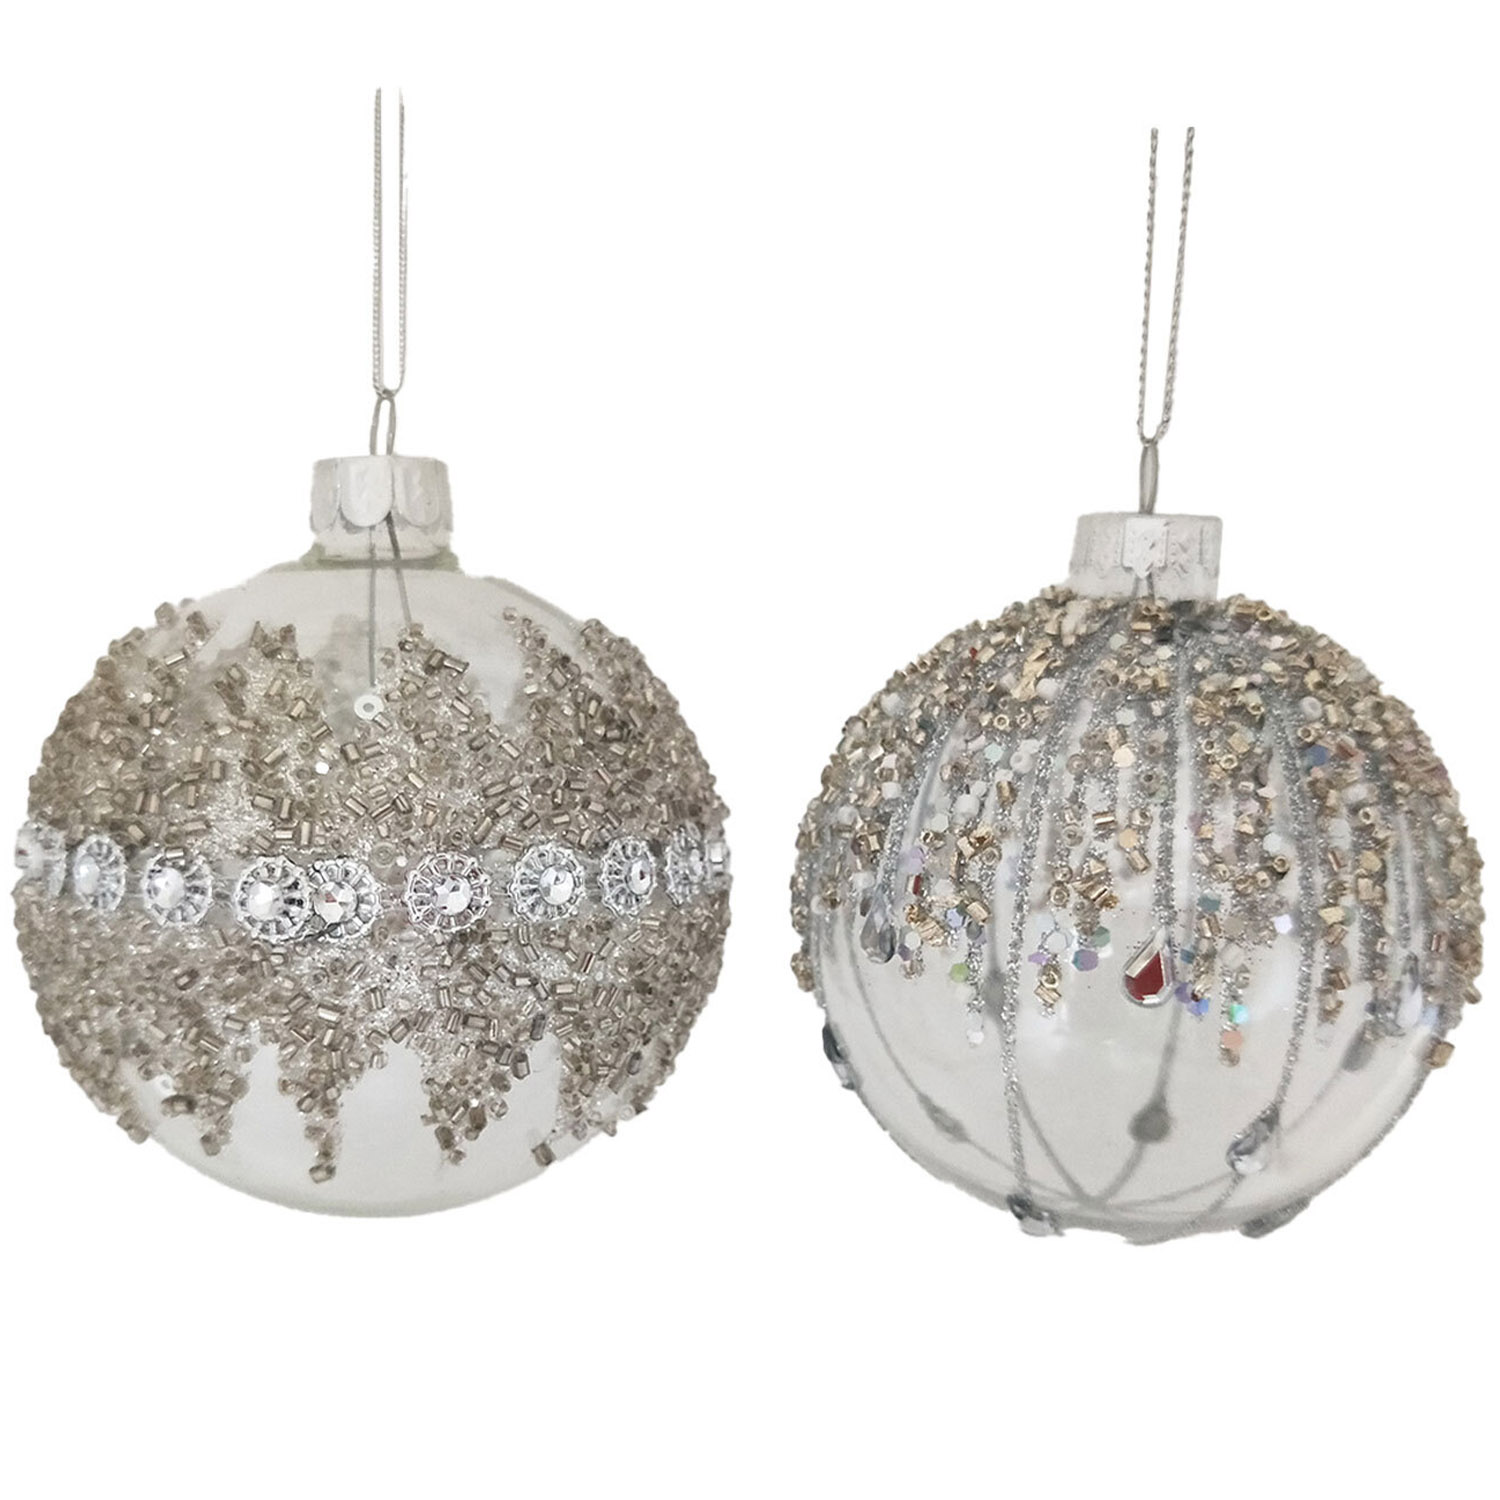 Single Chic Noir Clear Jewelled Sequin Bauble in Assorted styles Image